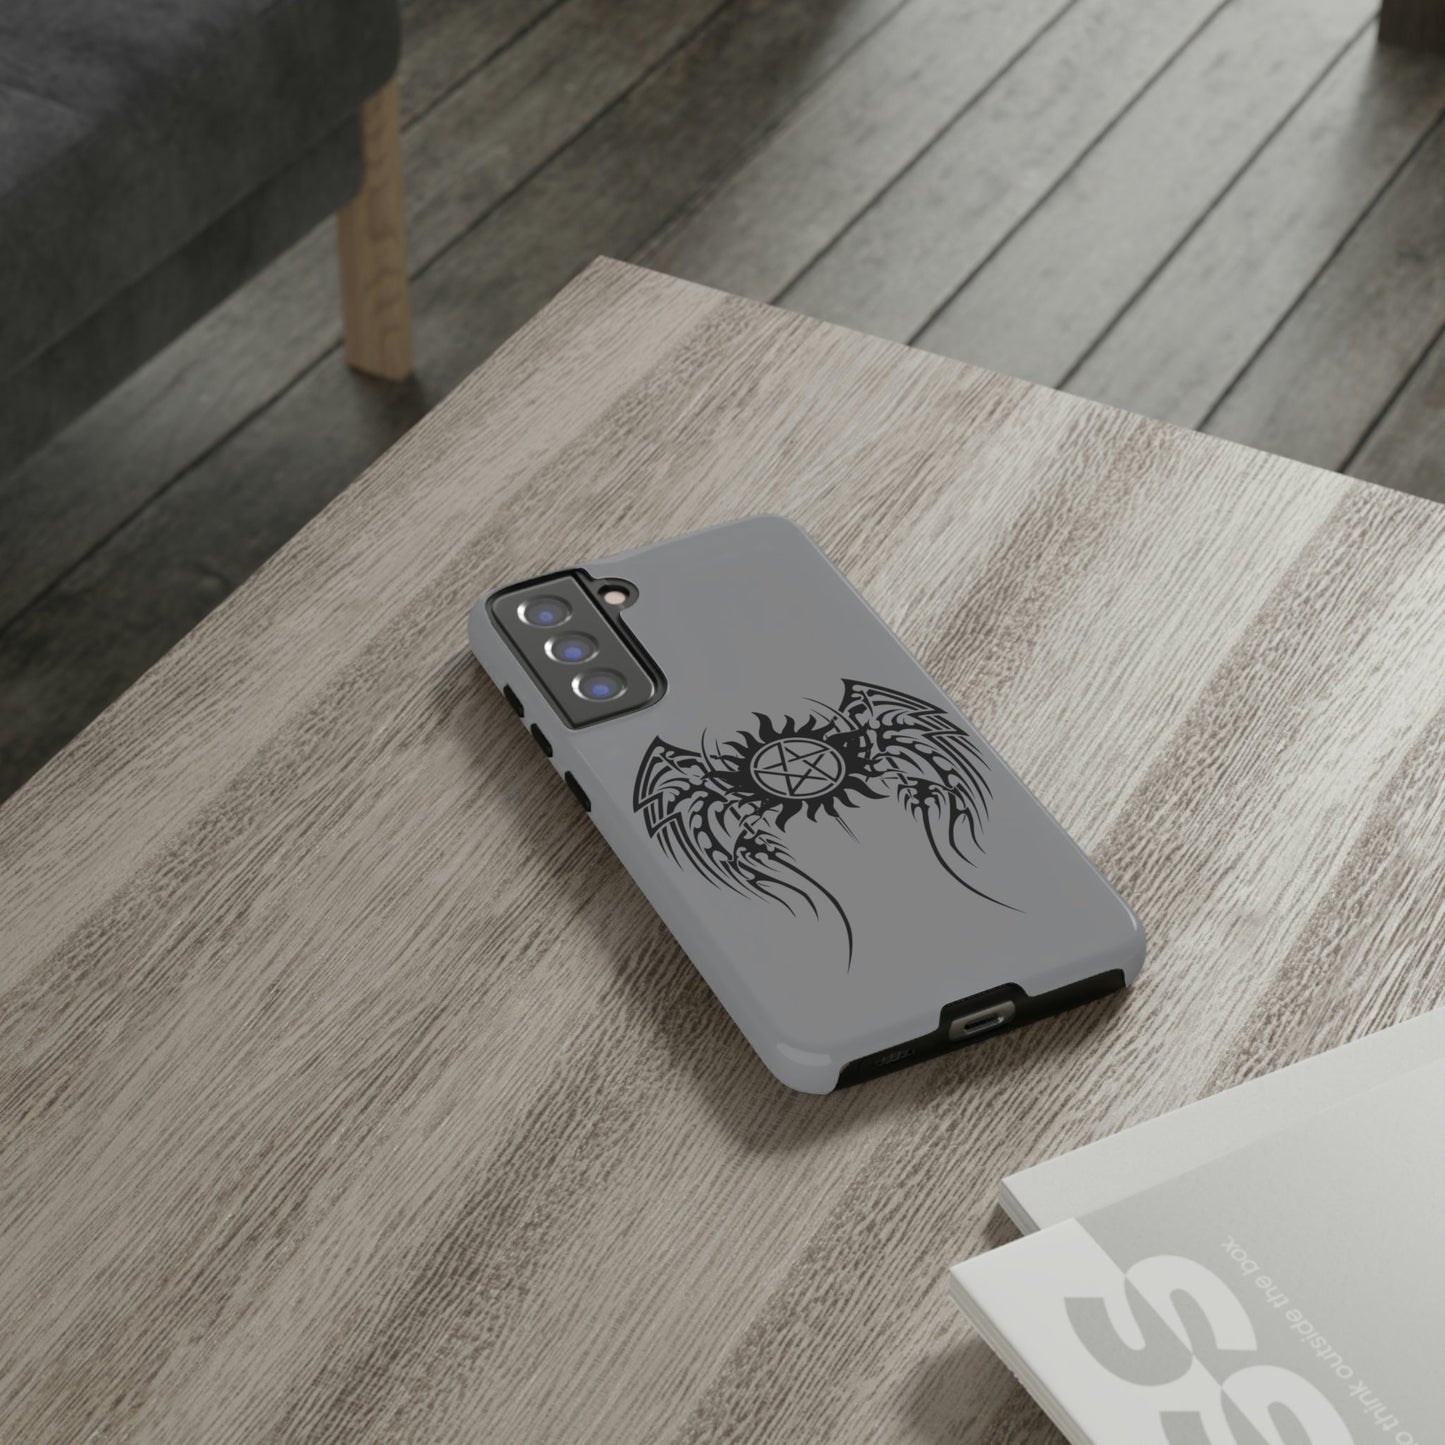 Supernatural Inspired Anti-Possession Cell Phone Case for iPhone, Samsung & Google